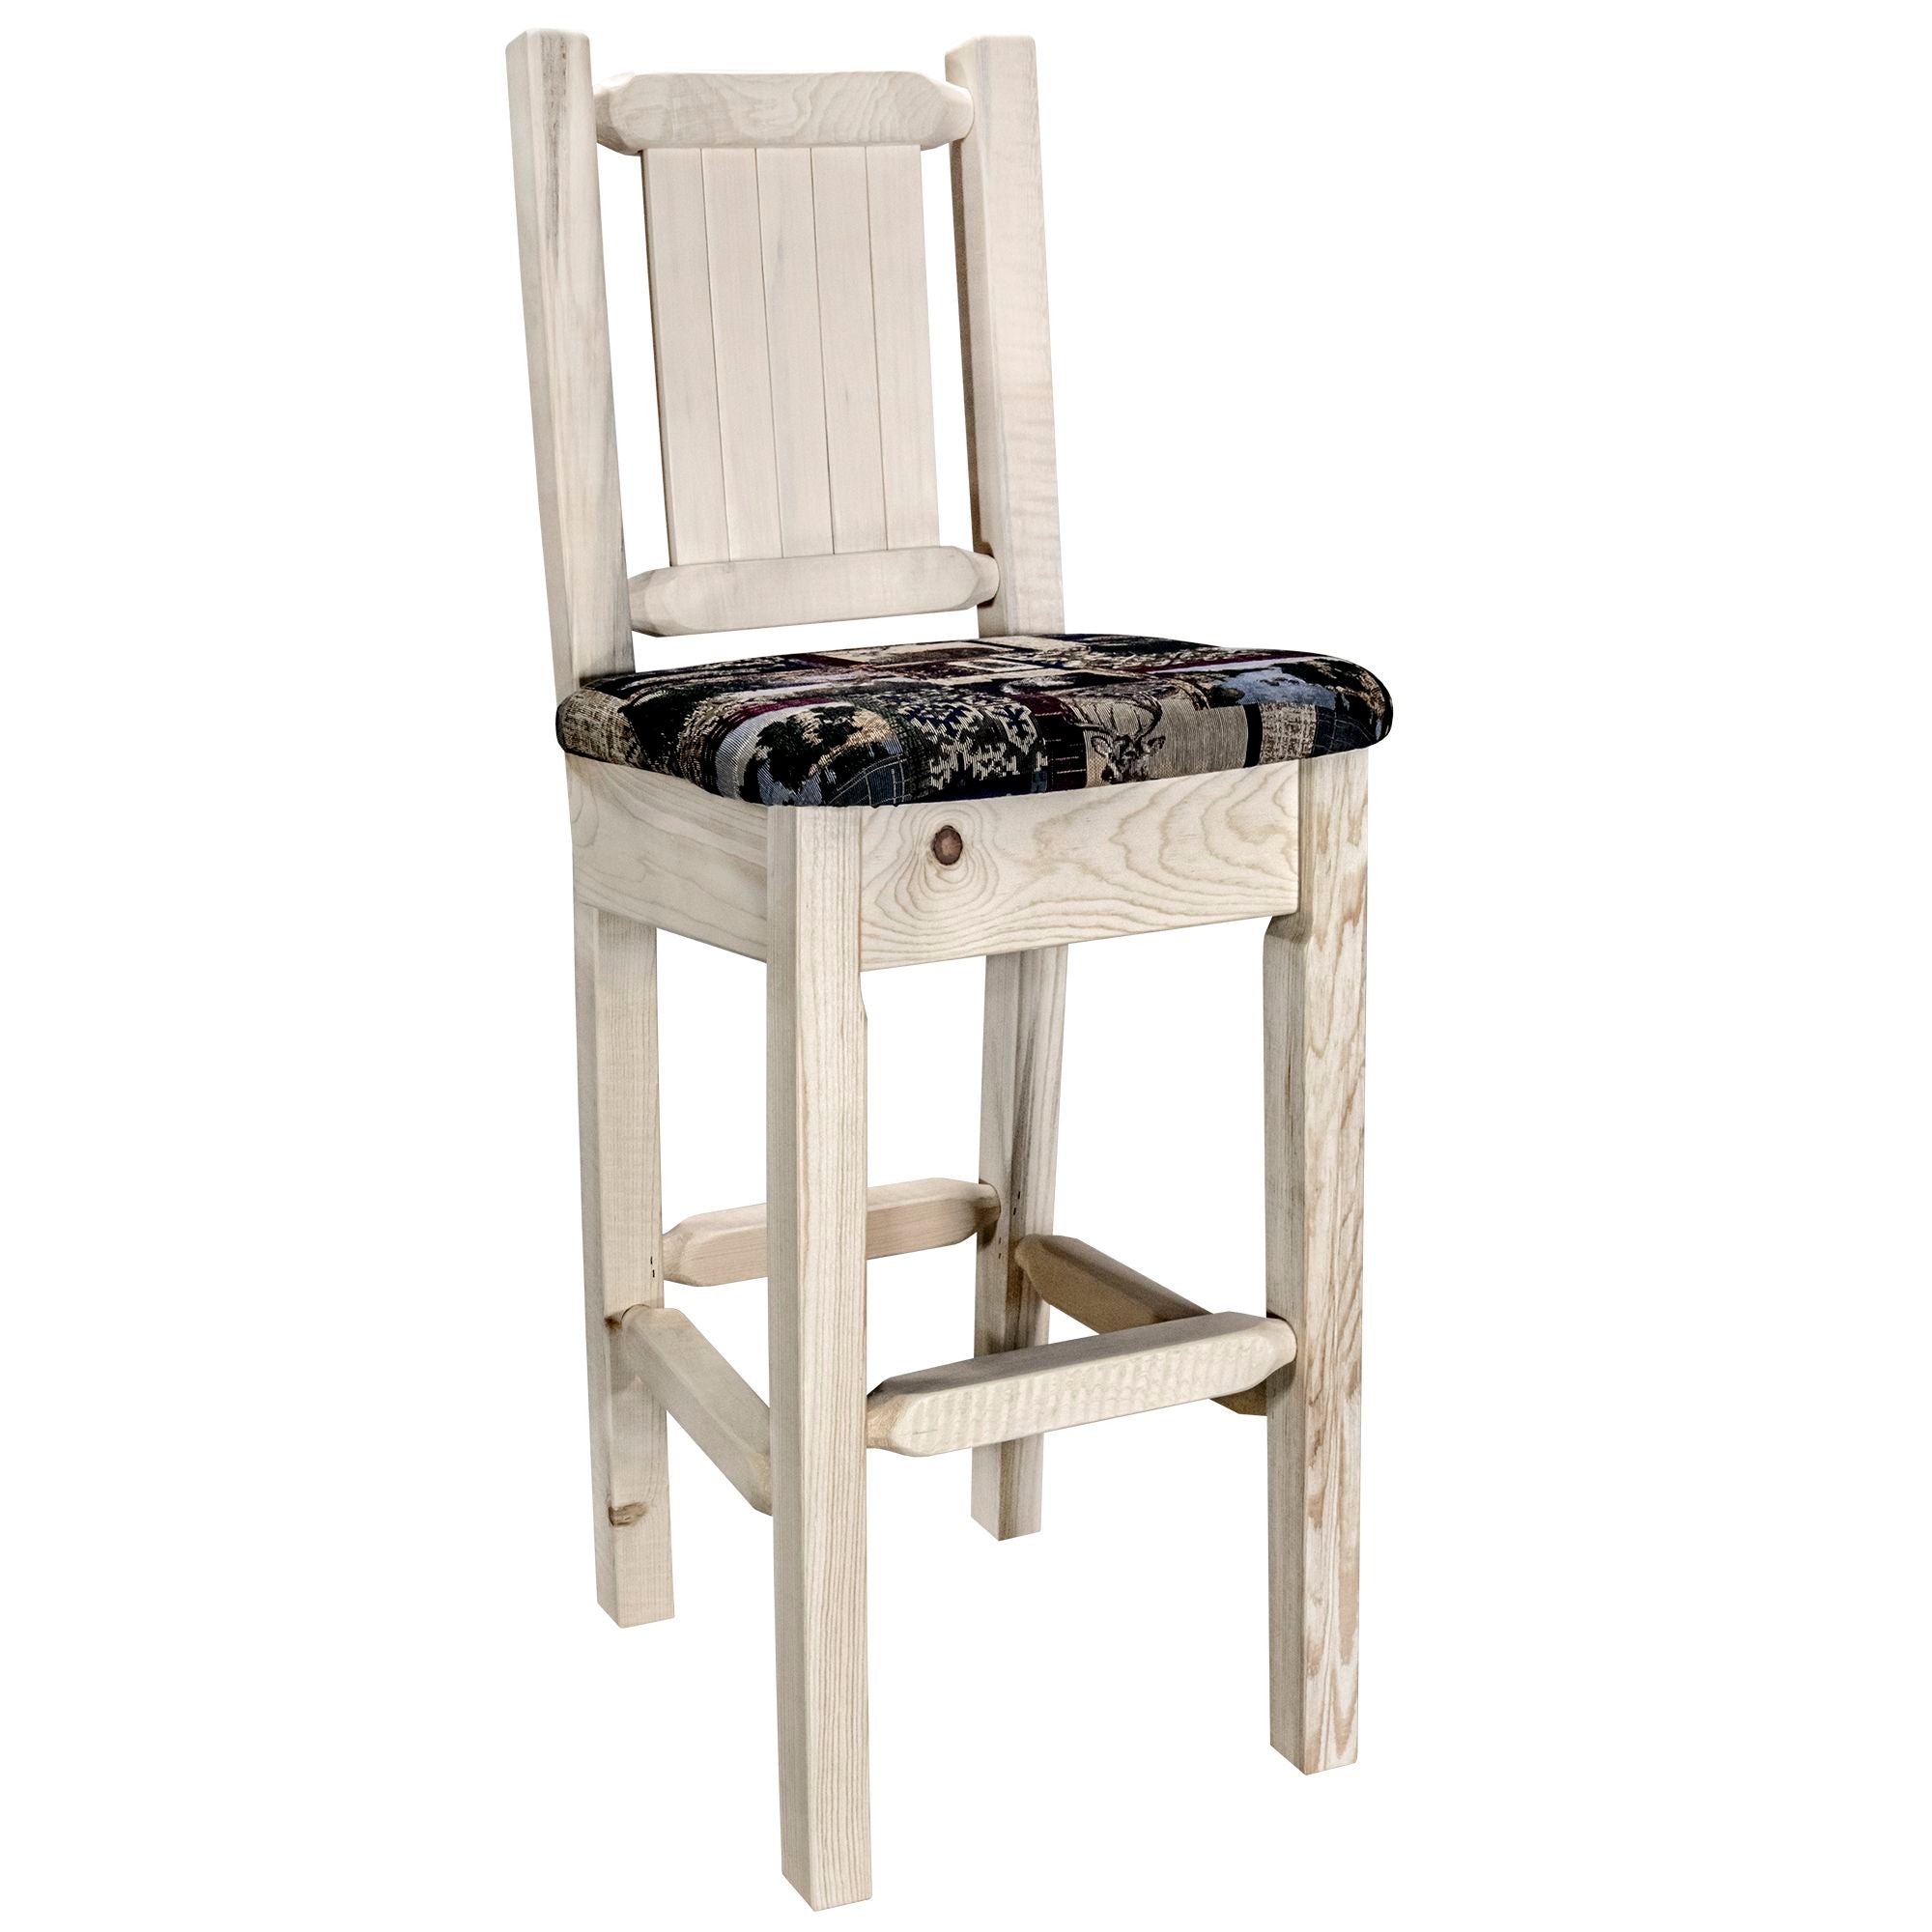 Montana Woodworks Homestead Collection Barstool w/ Back - Woodland Upholstery, w/ Laser Engraved Ready to Finish